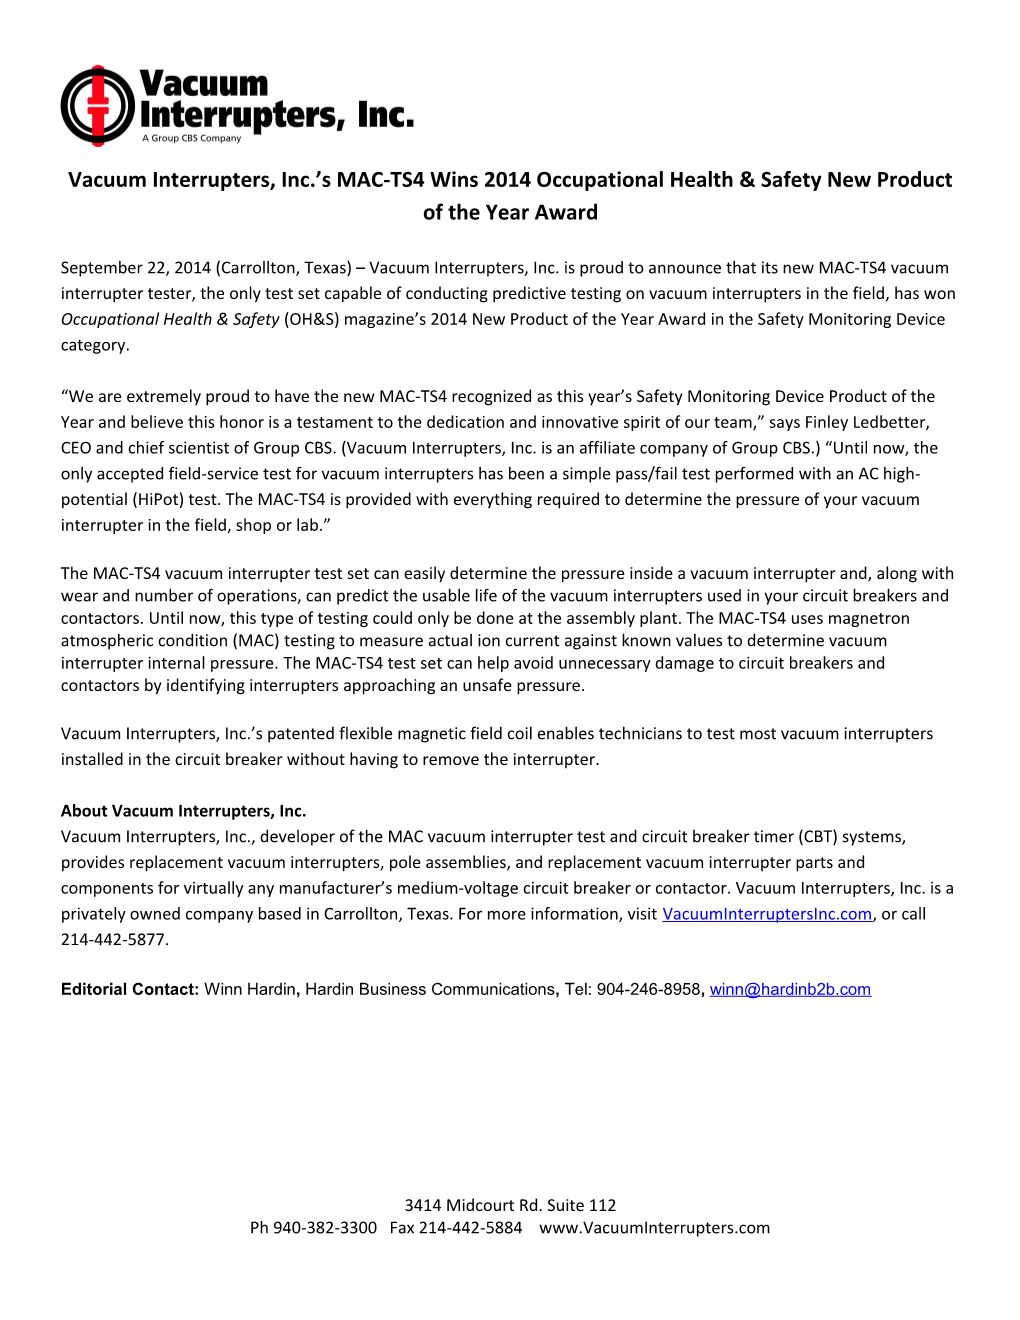 Vacuum Interrupters, Inc. S MAC-TS4 Wins 2014 Occupational Health & Safety New Product